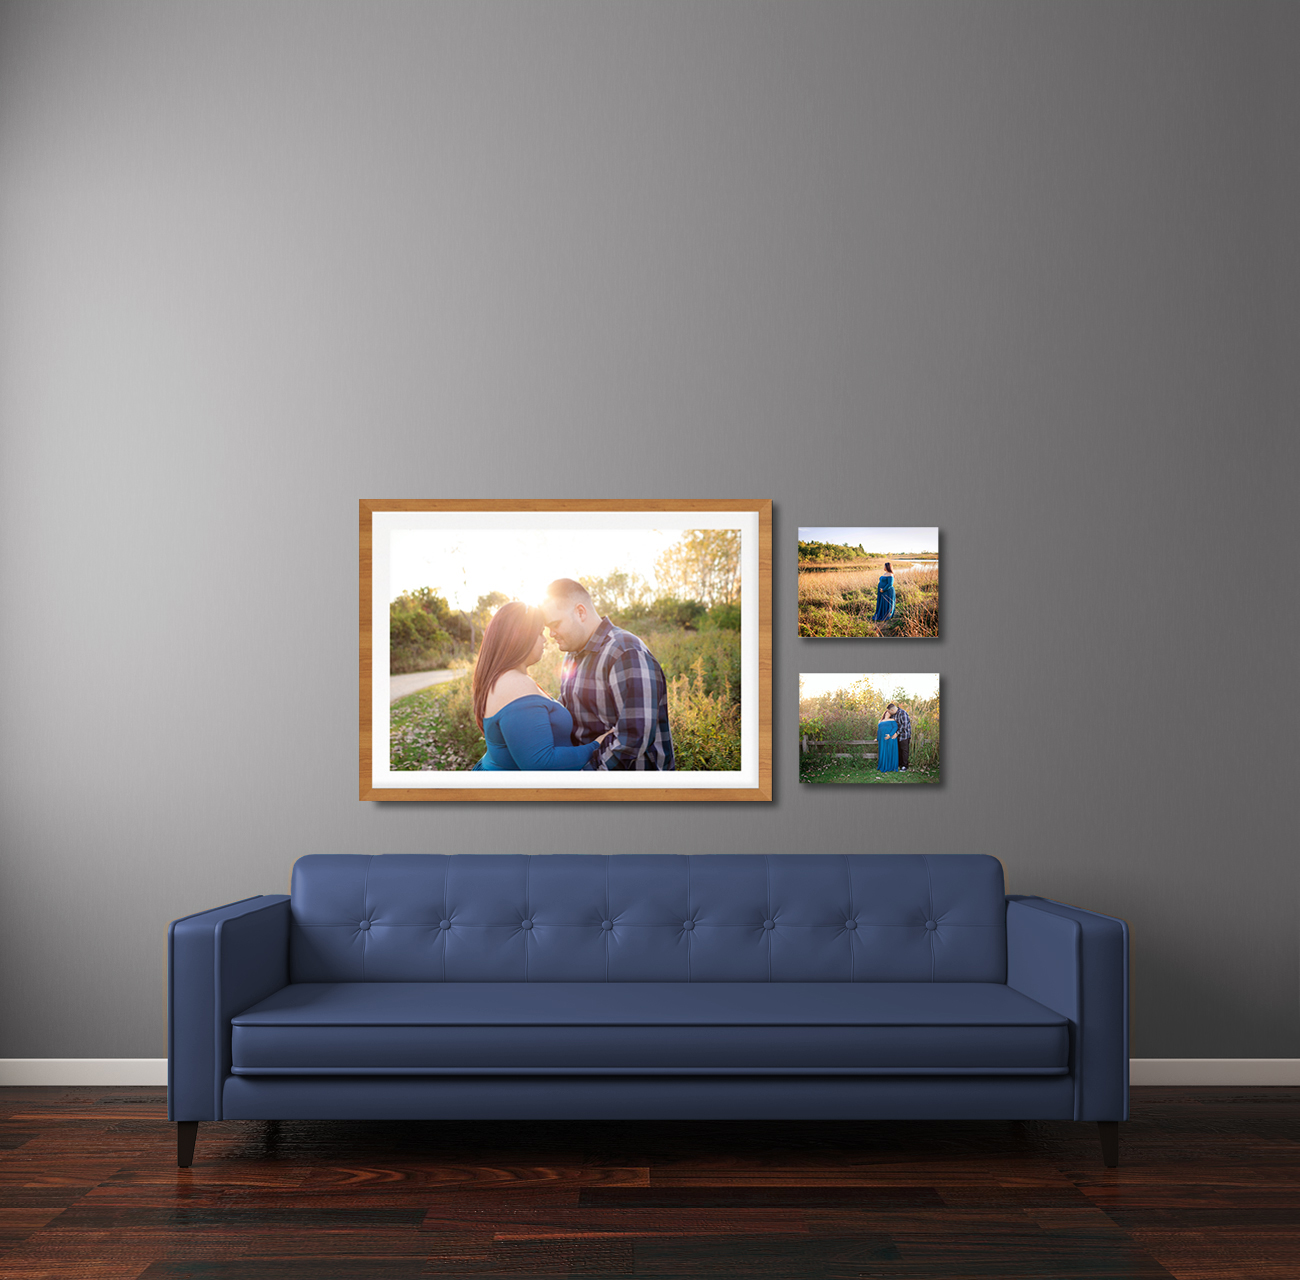 Wall art display services